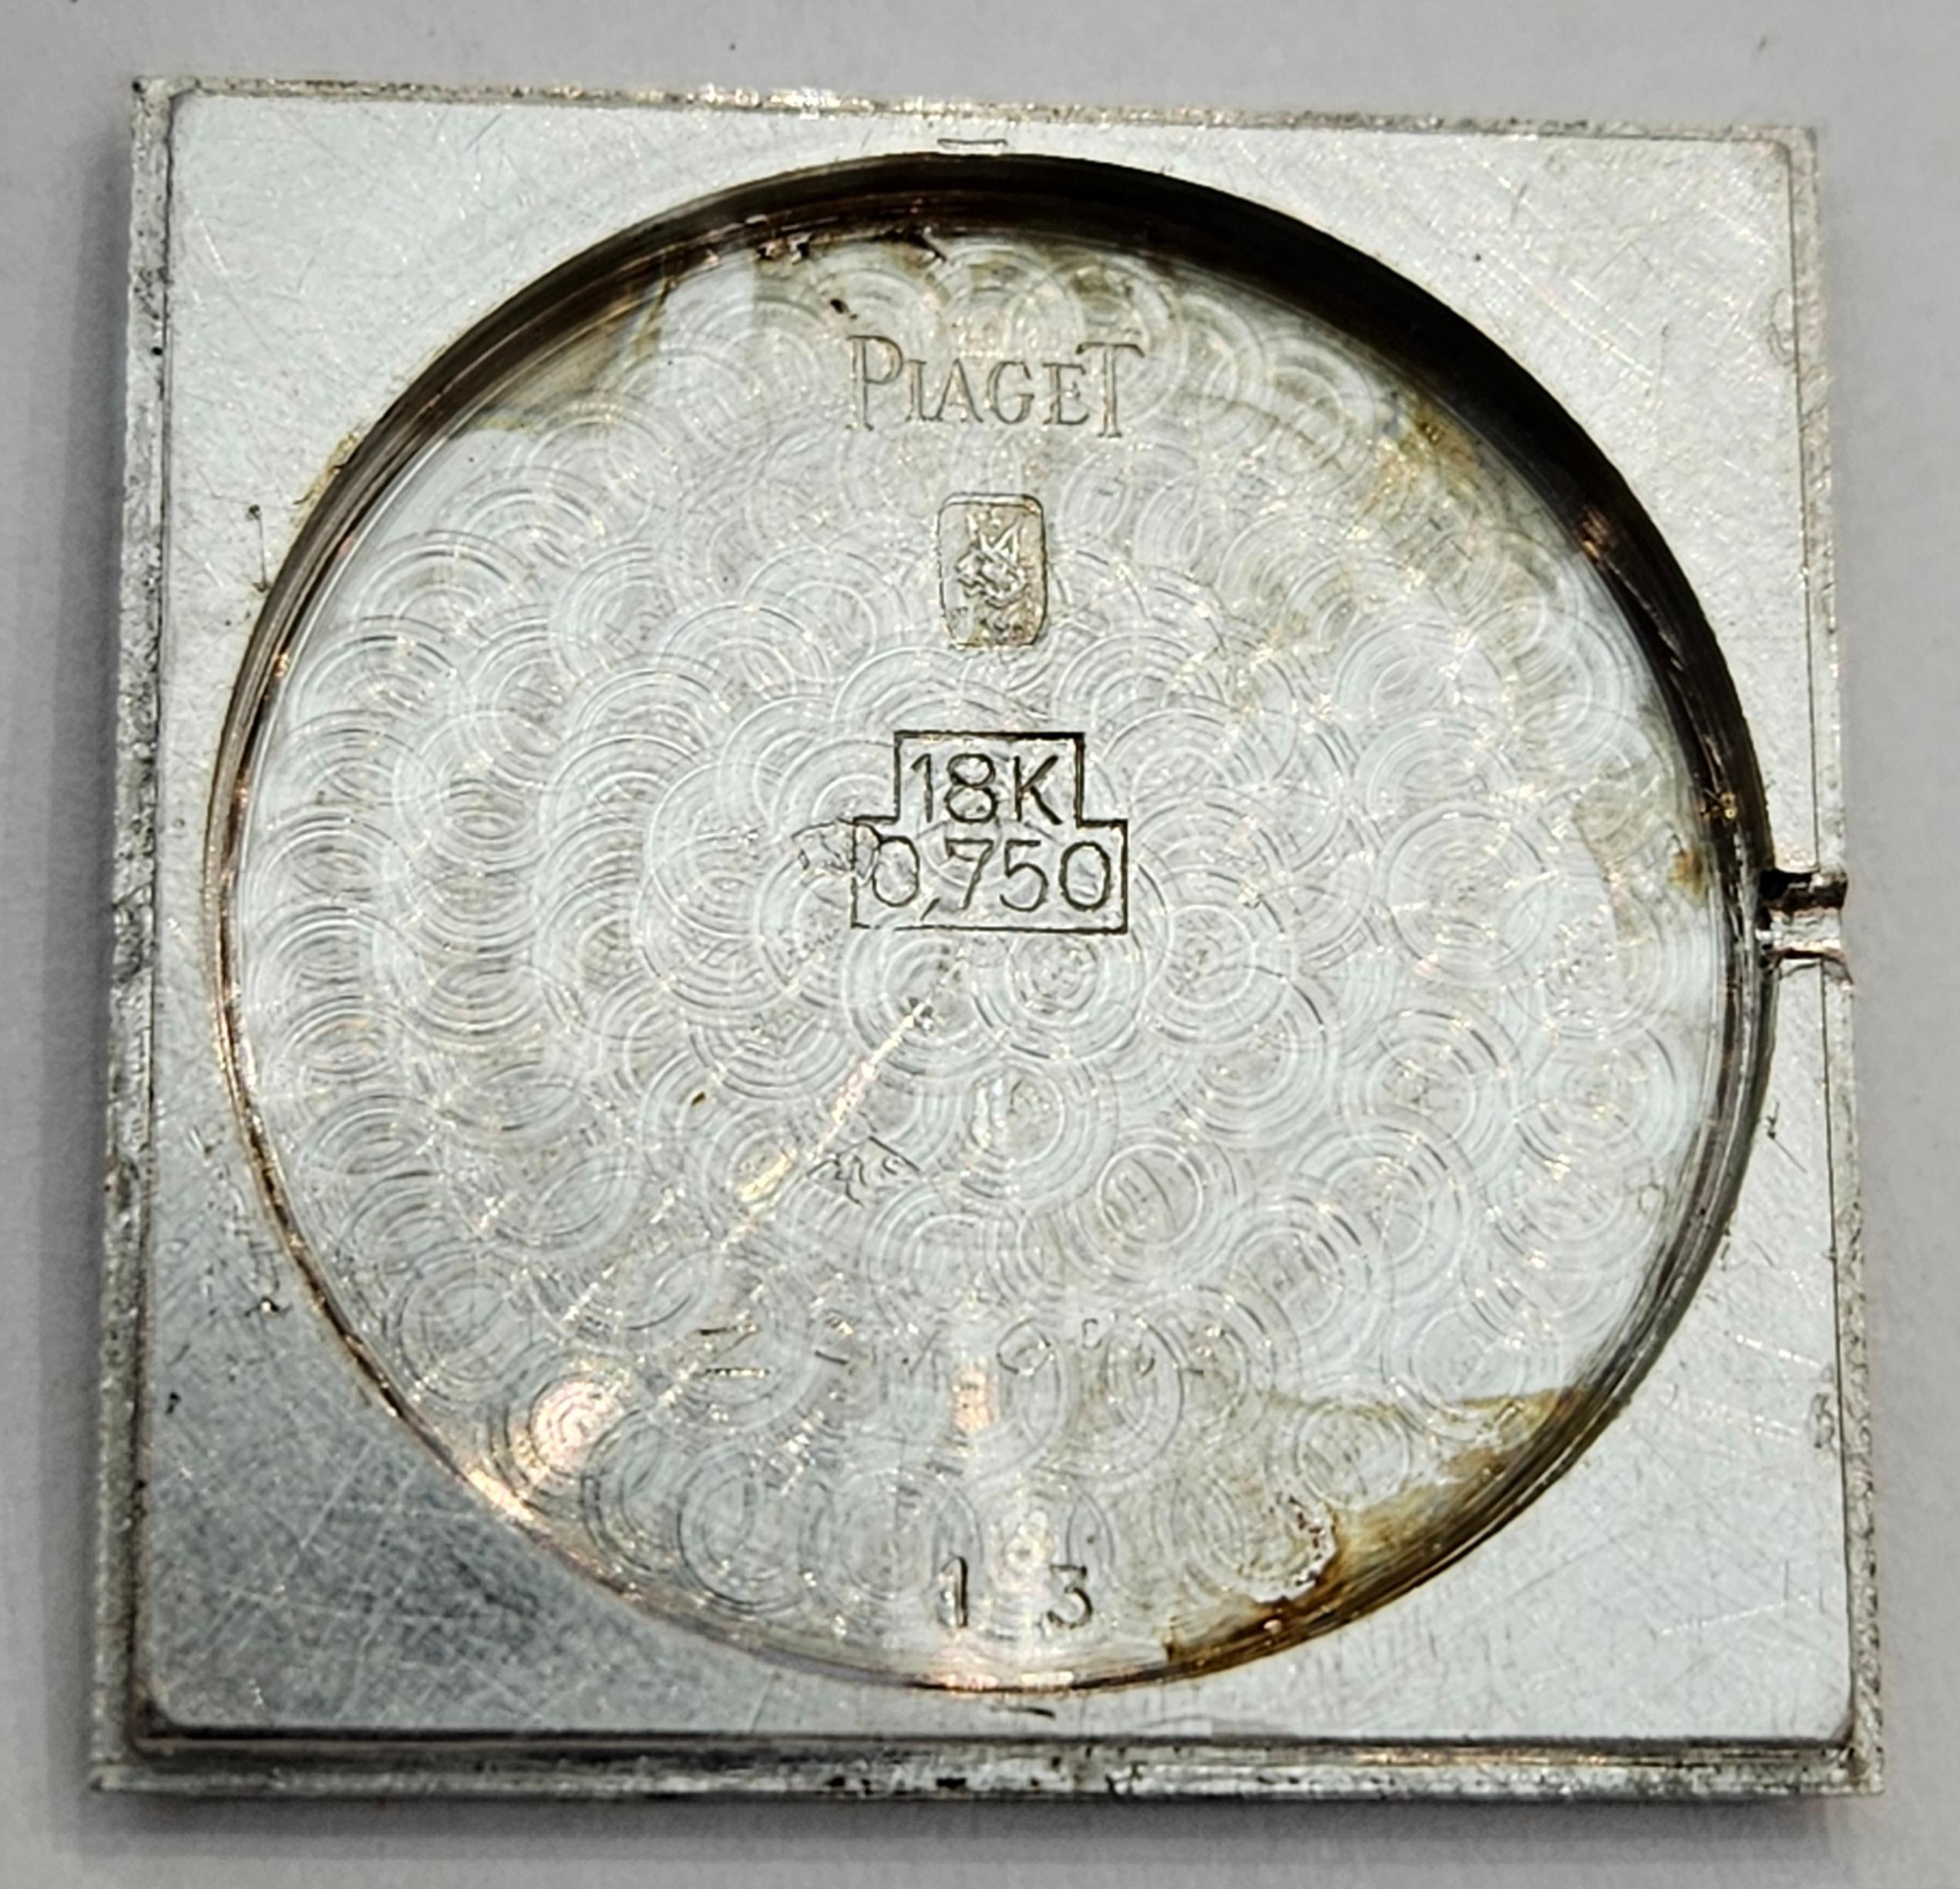 18 kt. White Gold Piaget Wrist Watch, Manual Winding Ultra Thin, Collectors For Sale 5